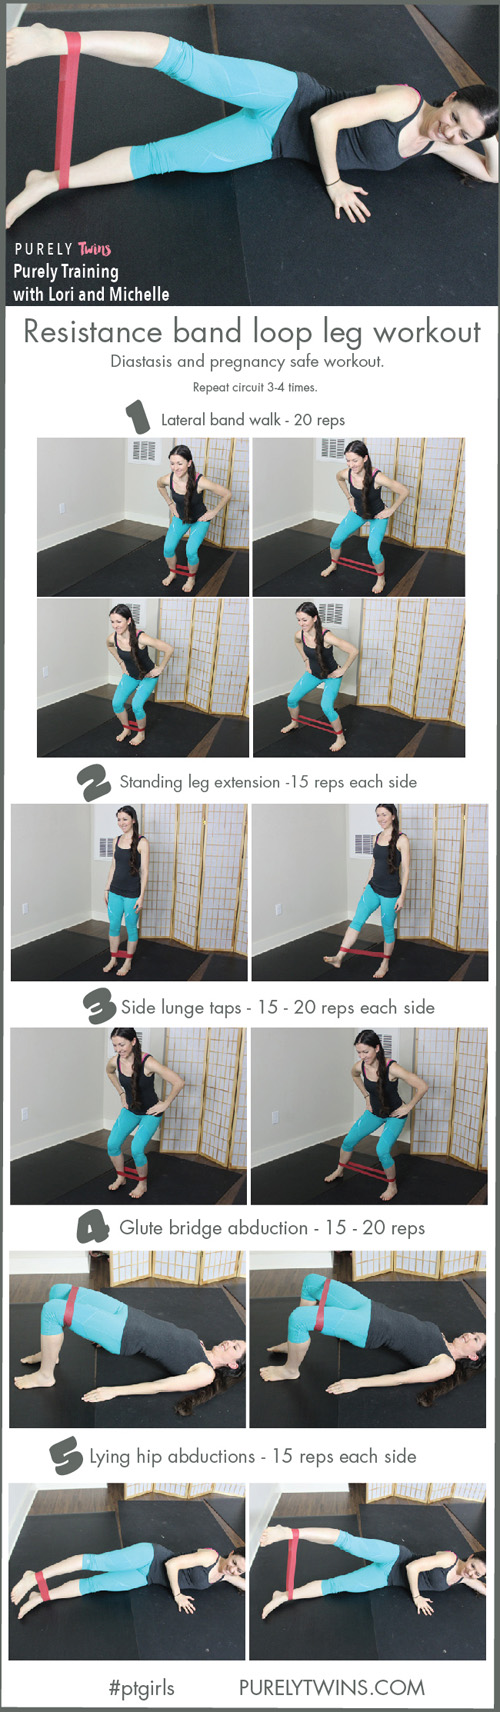 Resistance band workout to get strong legs, butt and core. These exercises will help diastasis and are safe for pregnancy. Best exercises to burn out your lower body using a resistance band loop. Get ready ladies to tone your legs at home with these 5 moves for sculpted thighs and glutes.